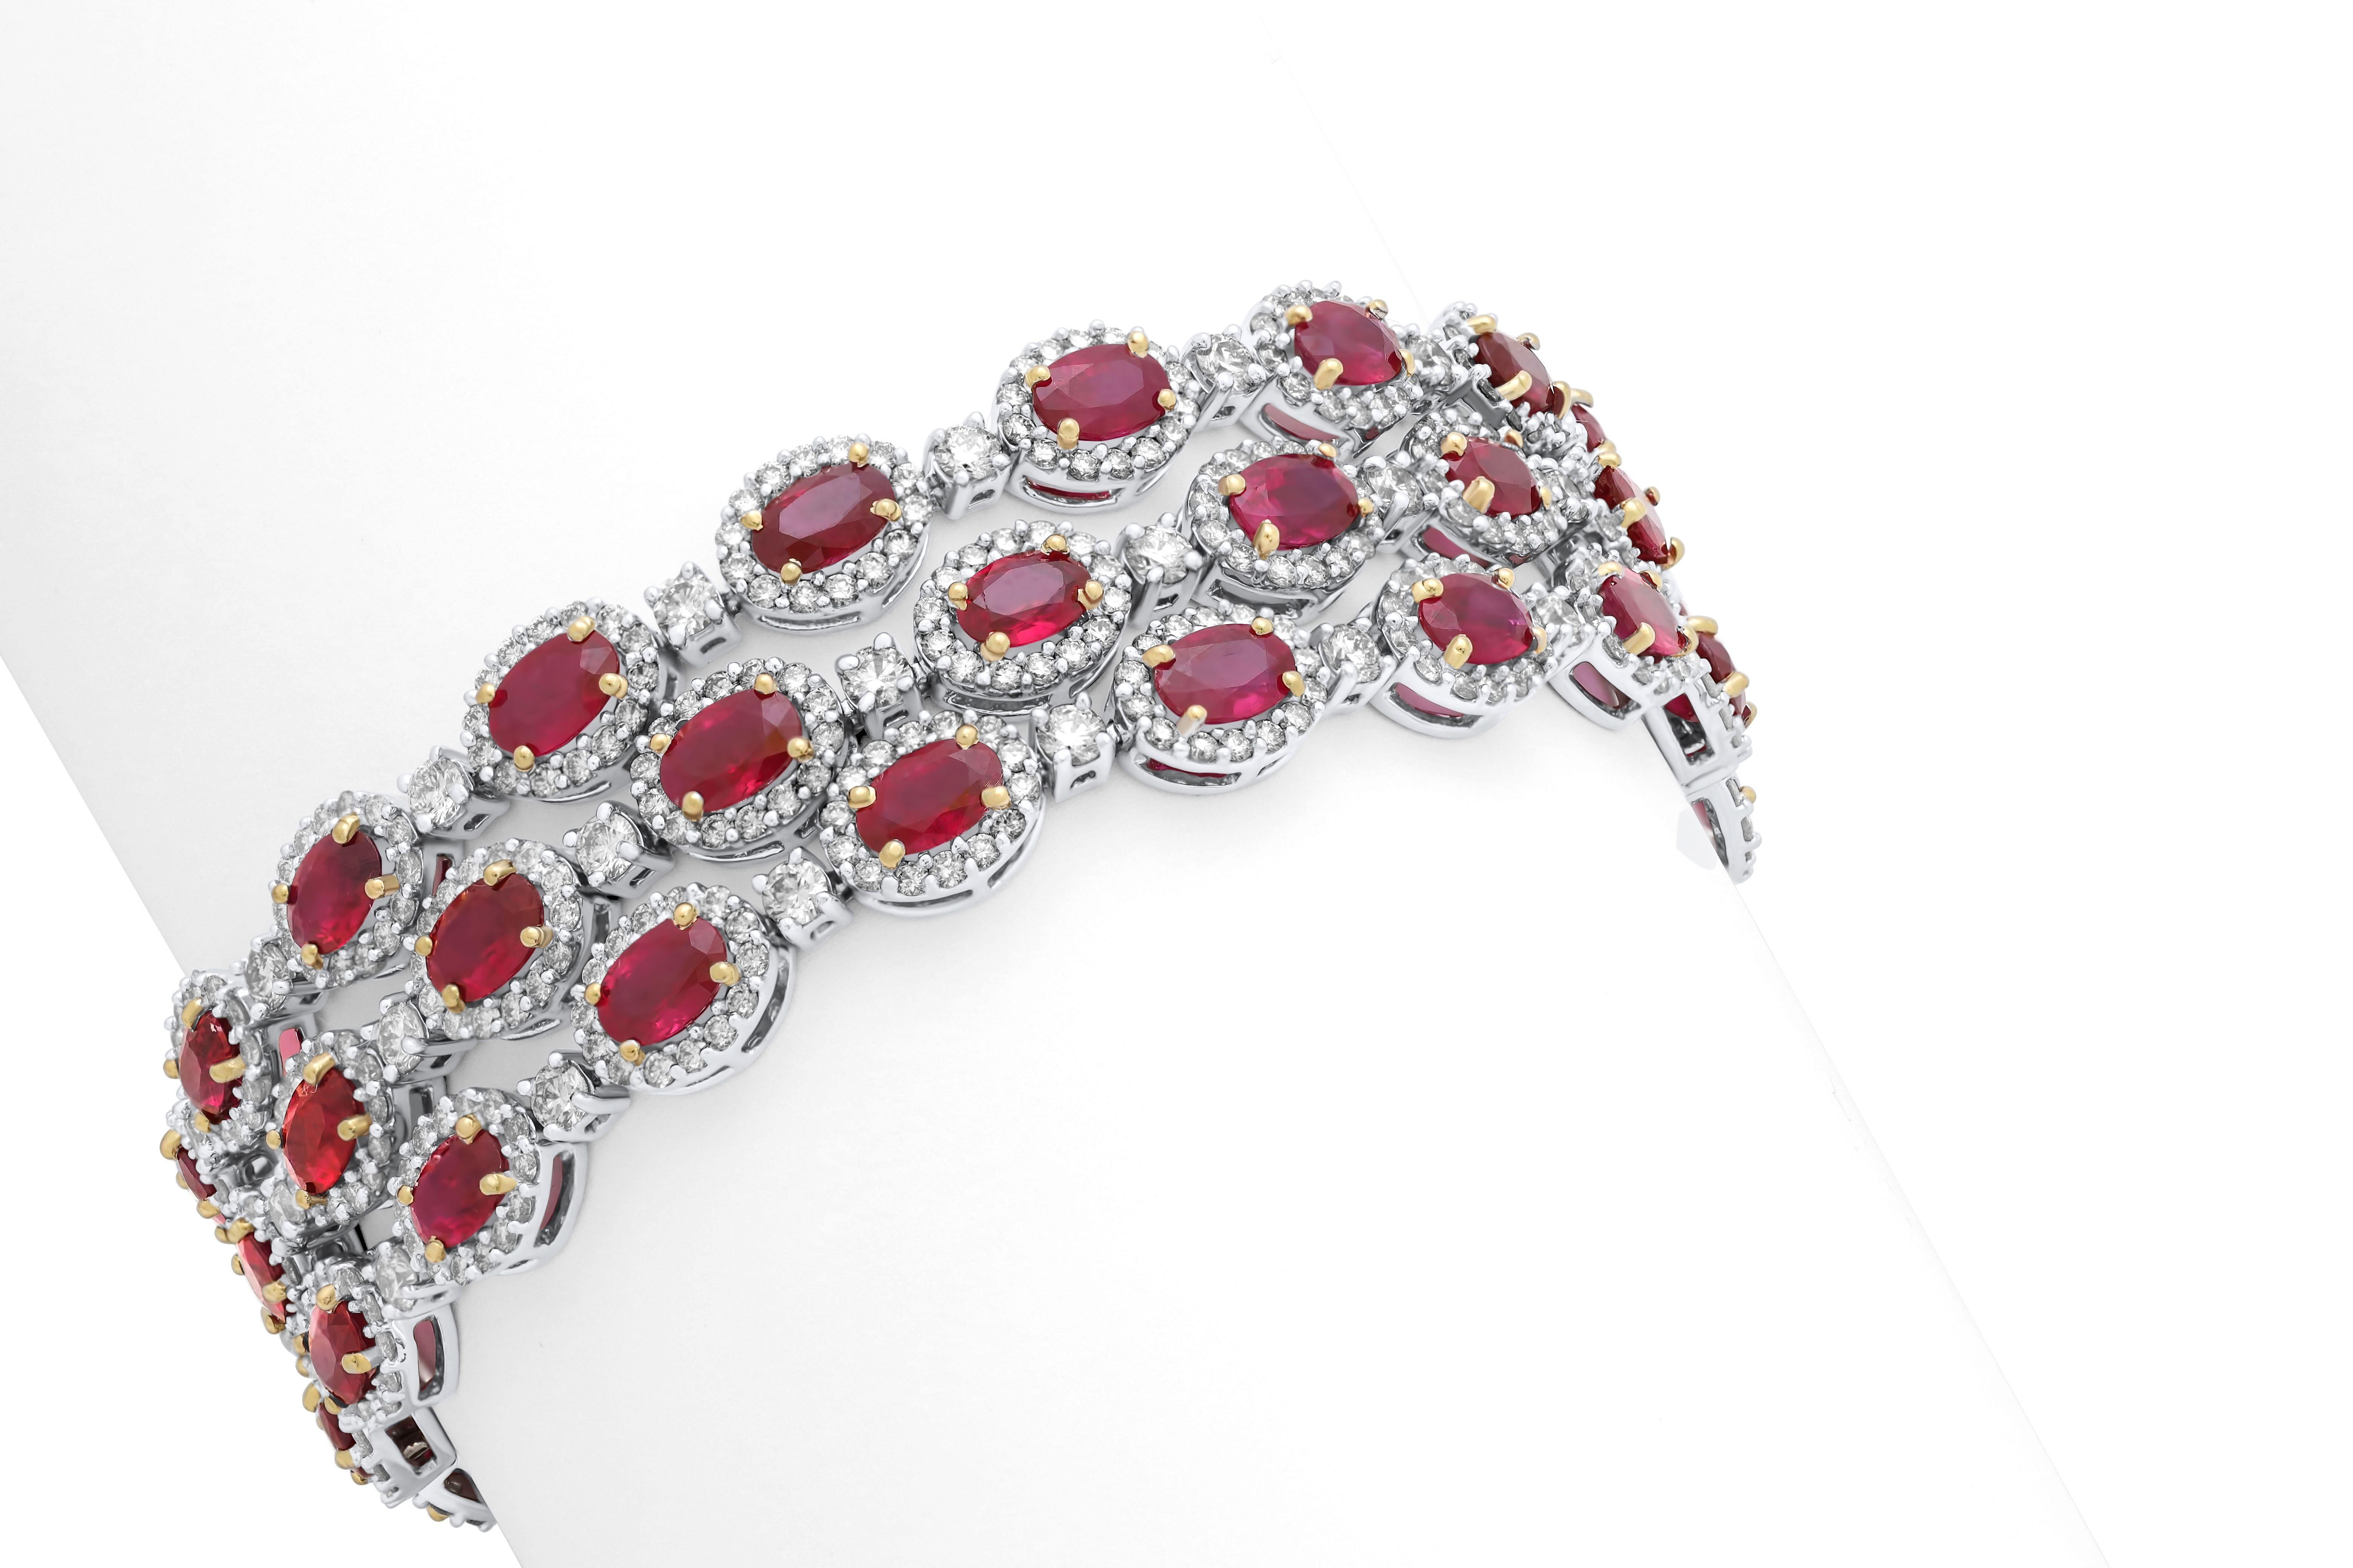 Oval Cut Diana M. 28.00 Carat Ruby and Diamond Bracelet in White Gold For Sale